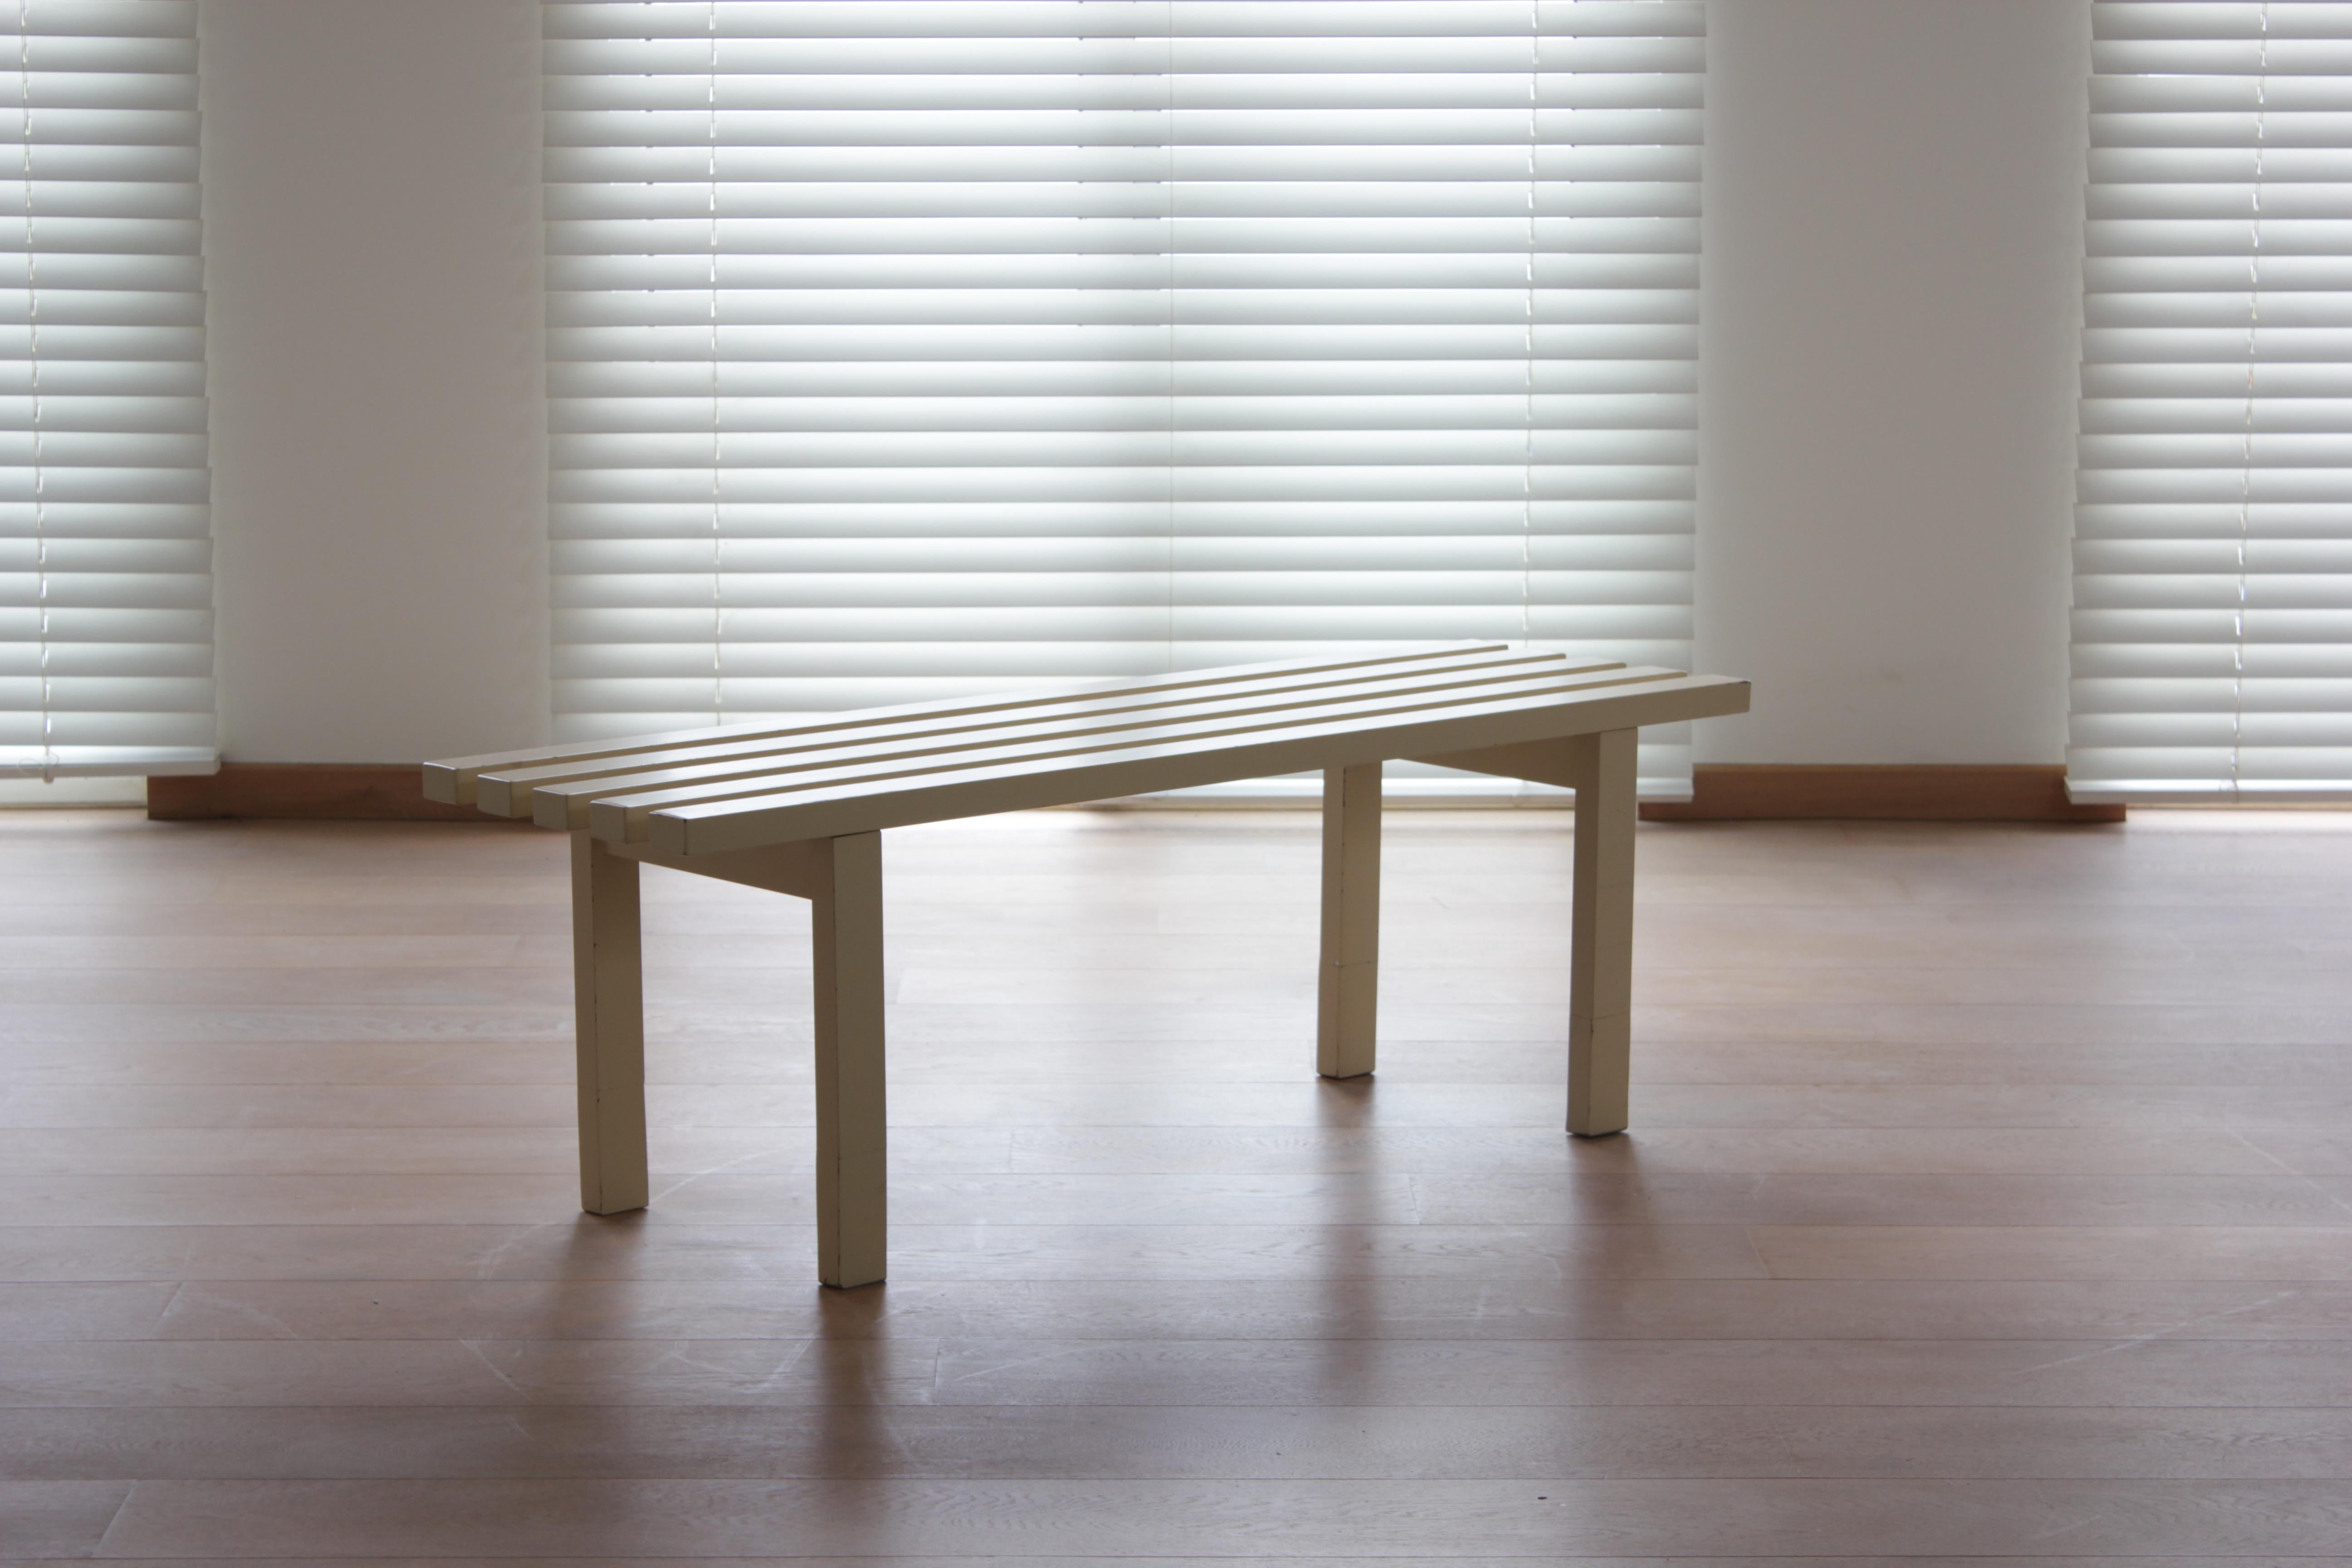 Mid-Century Modern Mid 20th Century Modern Bench attributed to Martin Visser for 't Spectrum, 1960s For Sale